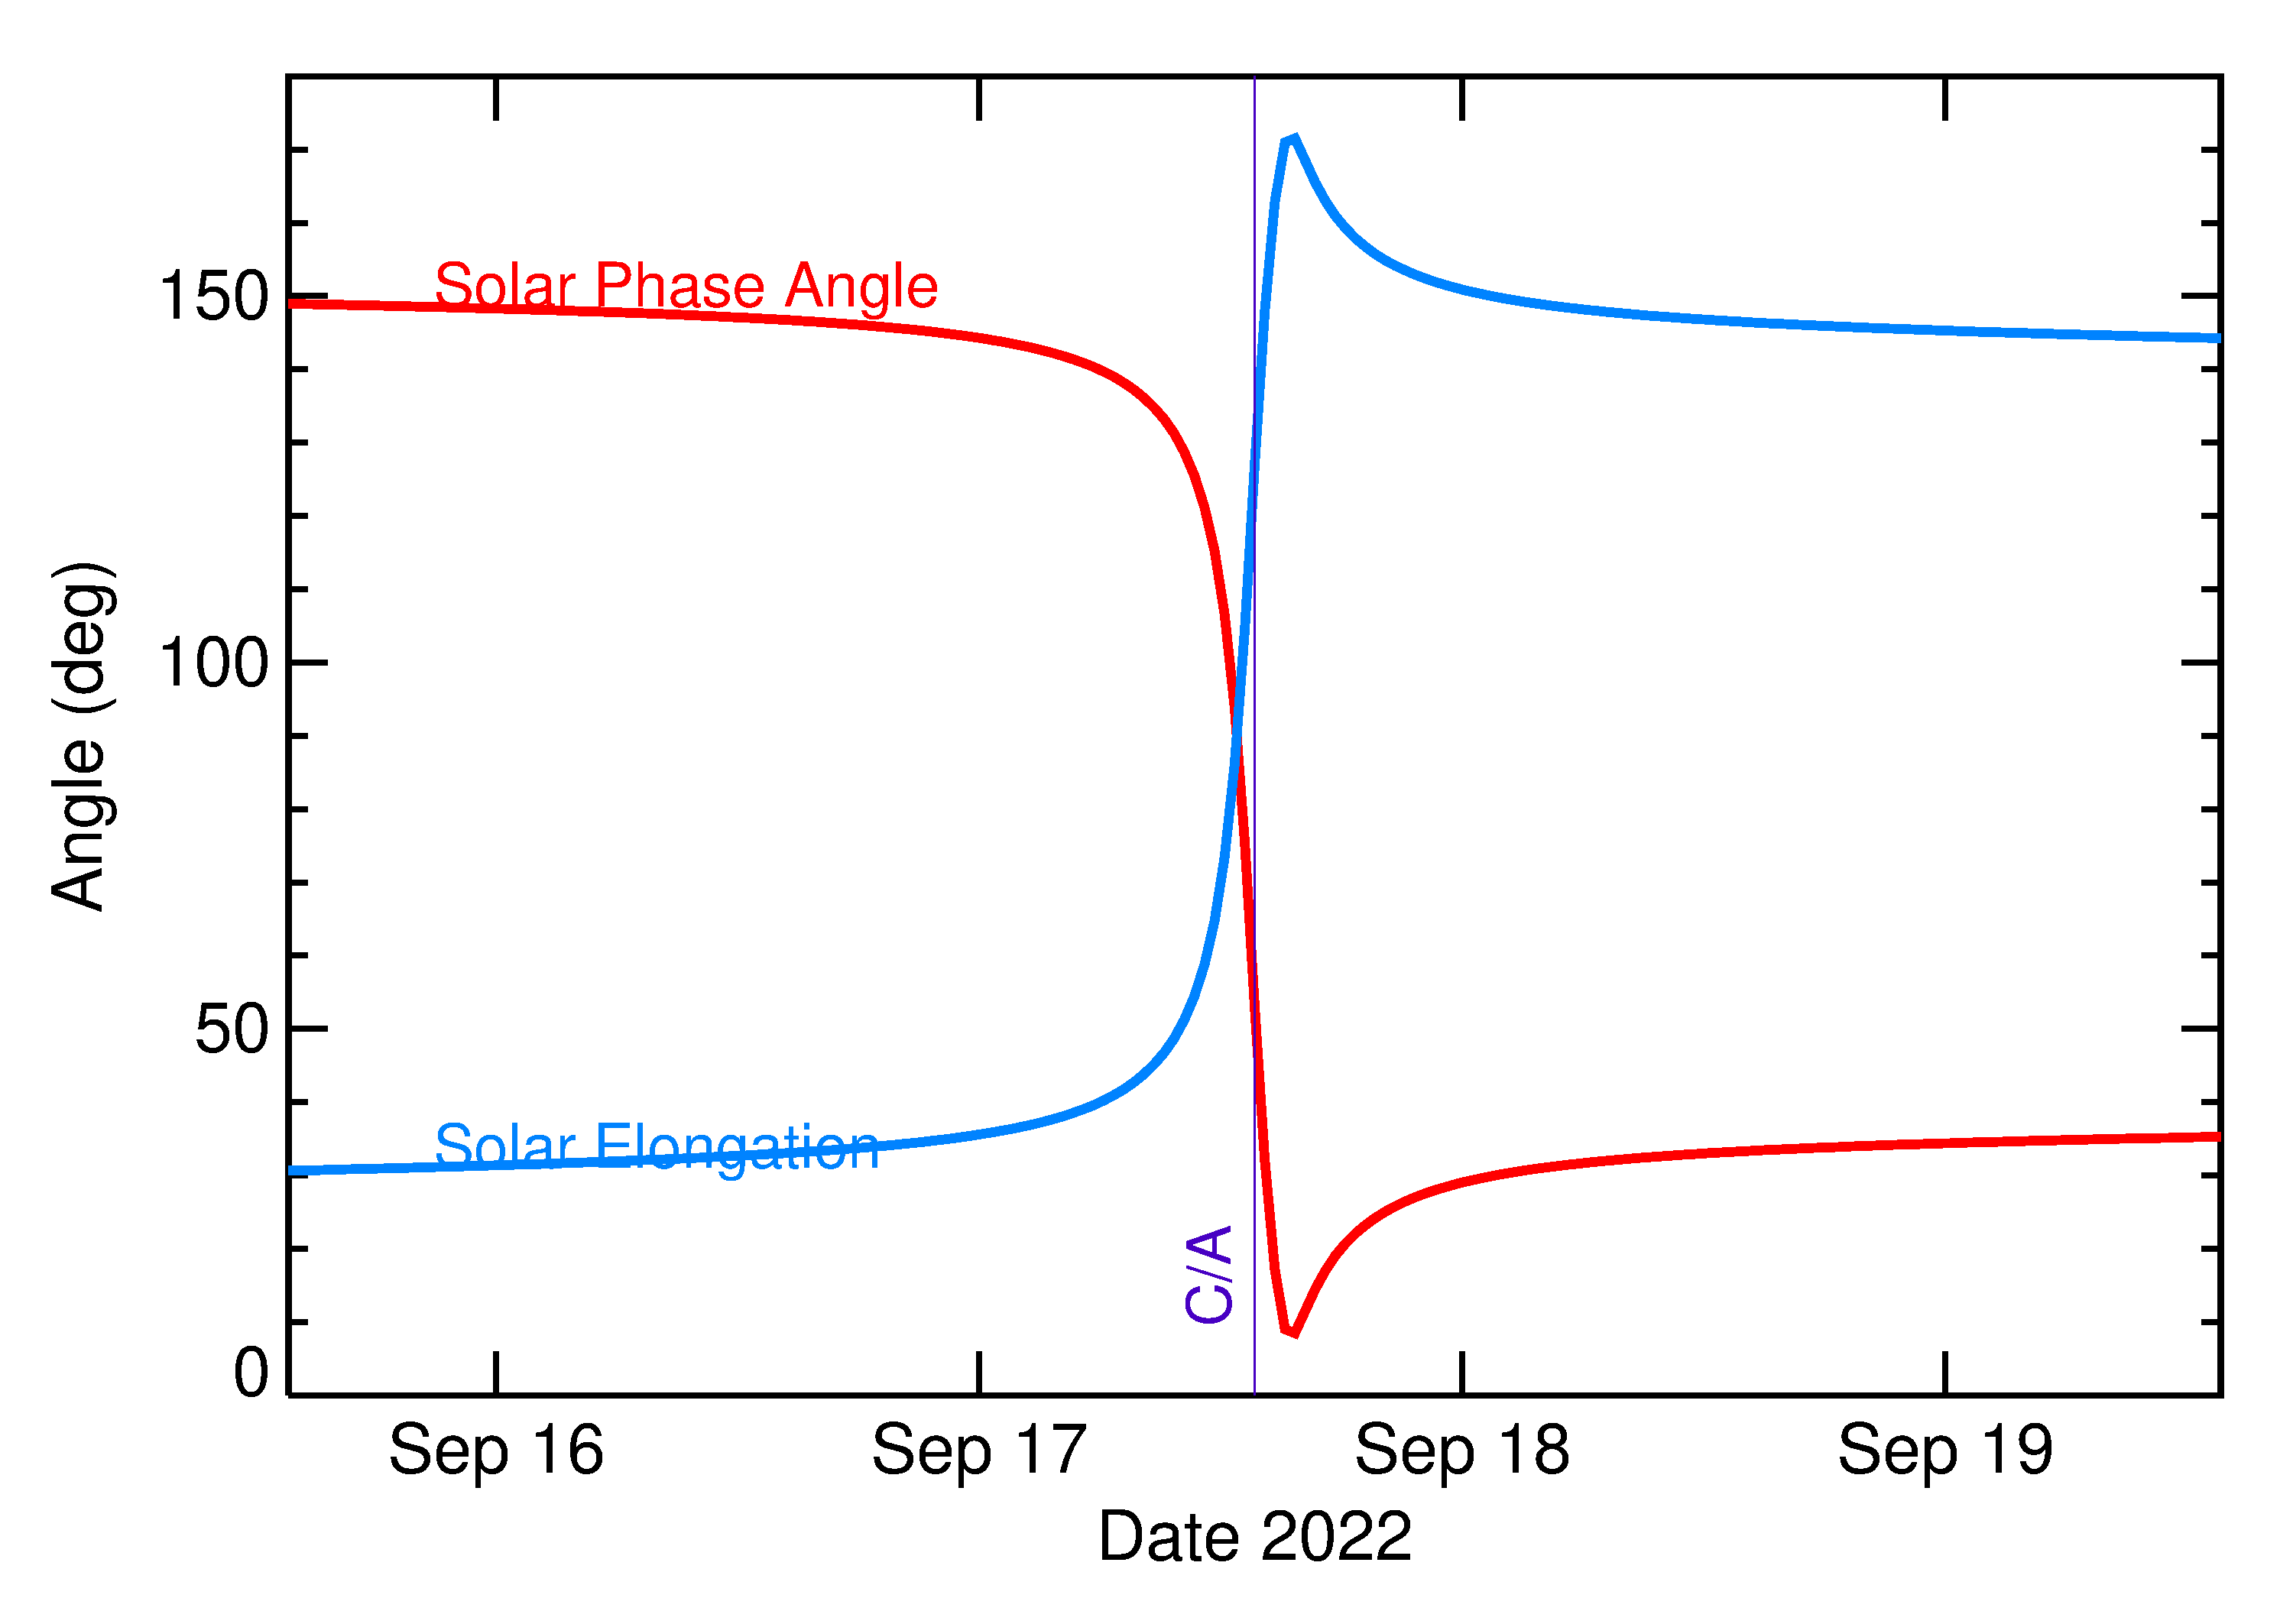 Solar Elongation and Solar Phase Angle of 2022 SX55 in the days around closest approach